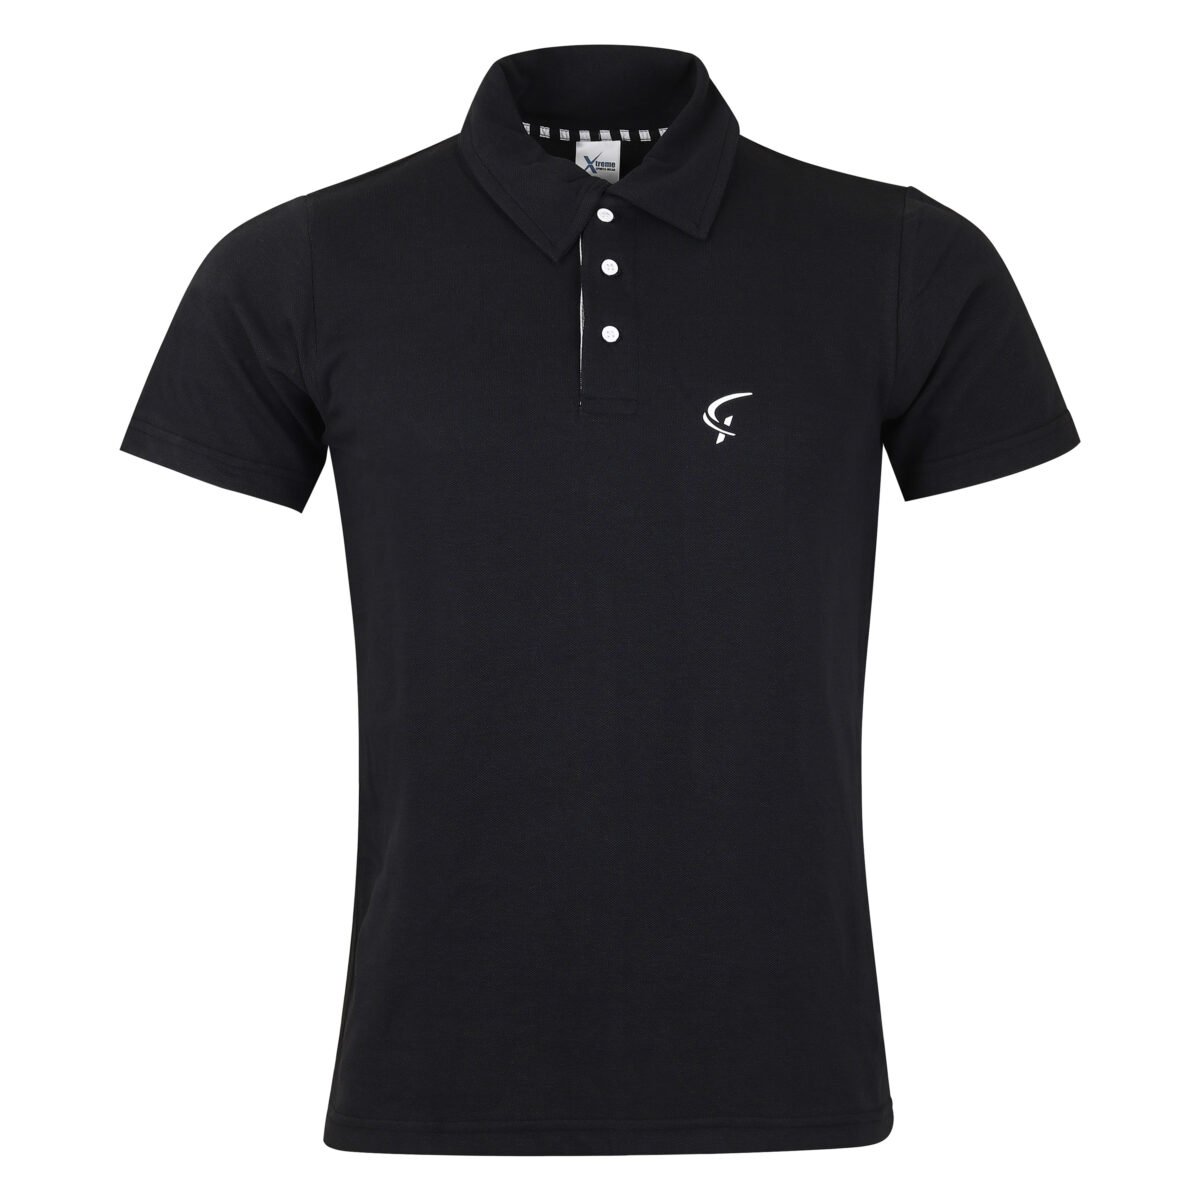 Buy Polo Shirts for Men Online Shopping in Pakistan